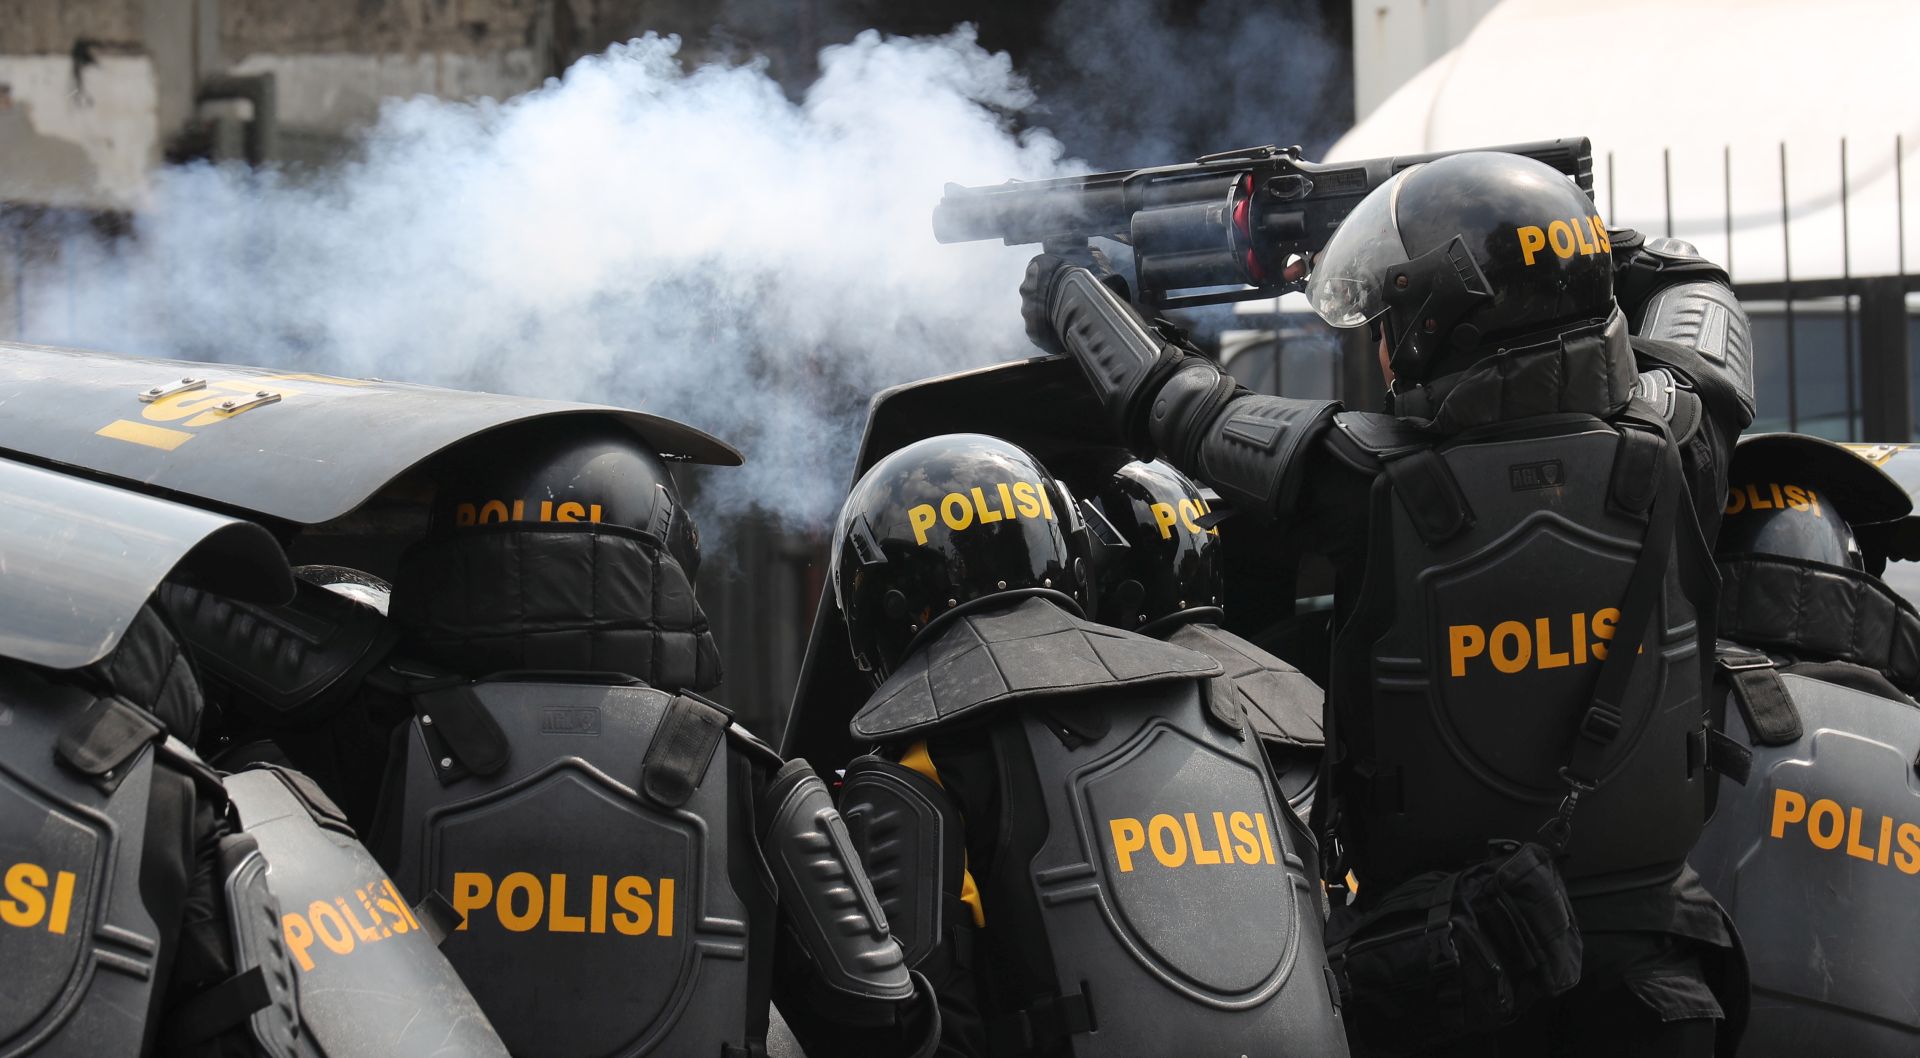 epa07590808 An Indonesian riot police officer shoots tear gas during clashes with protesters during a protest following the announcement of the presidential election results in Jakarta, Indonesia, 22 May 2019. Incumbent Indonesian President Joko Widodo was re-elected after winning the presidential election over his rival, retired General Prabowo Subianto, the election commission announced on 21 May 2019.  EPA/BAGUS INDAHONO